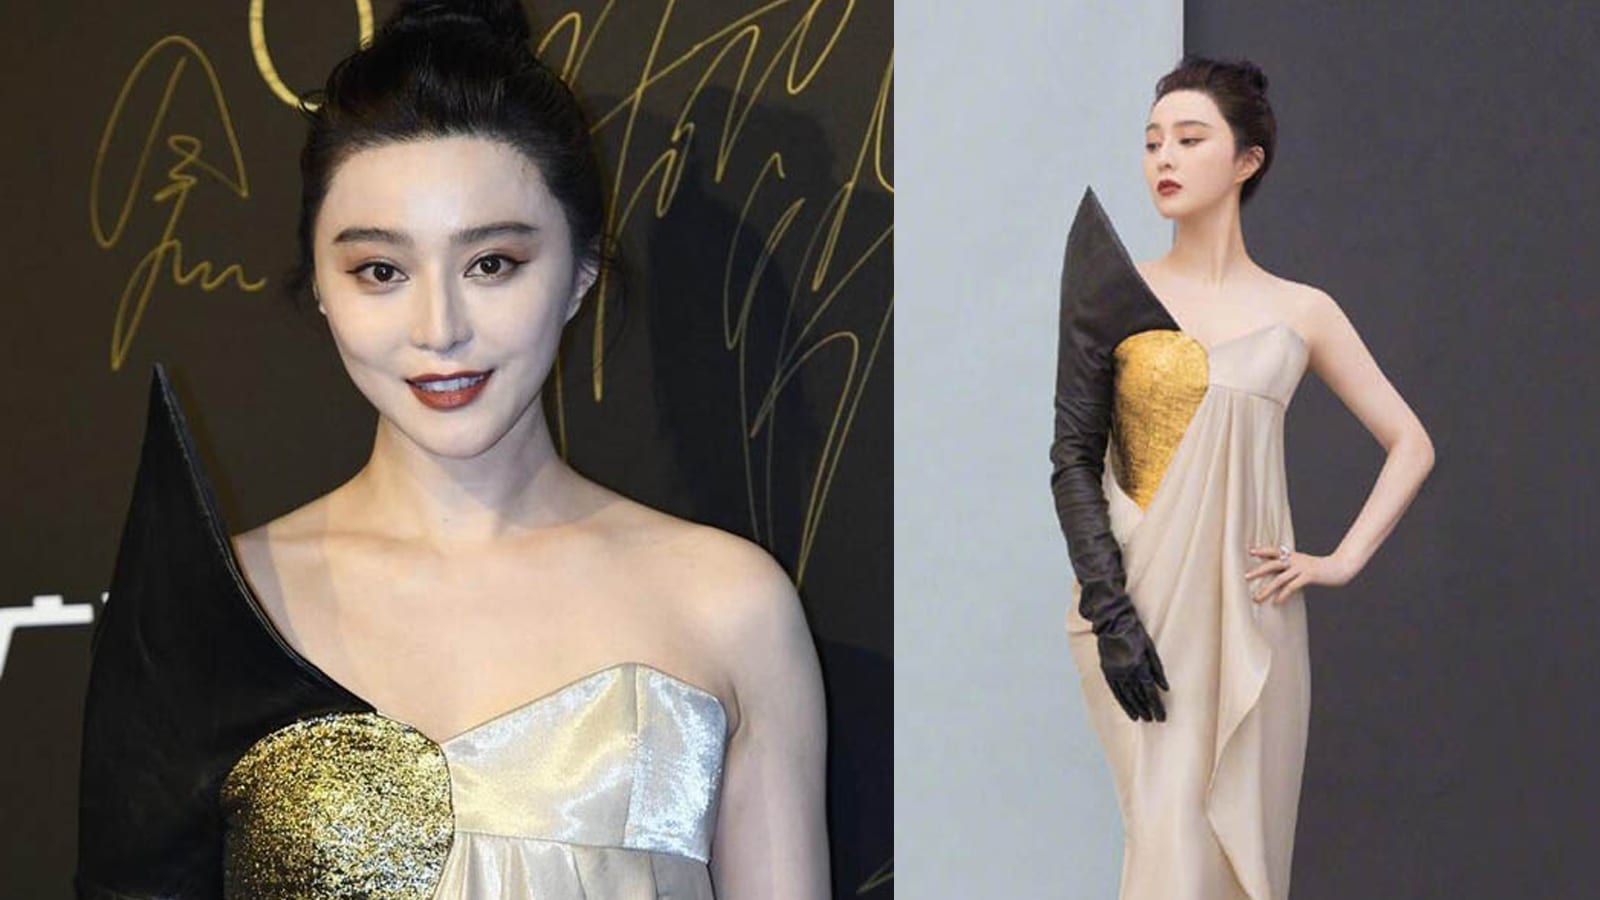 Fan Bingbing Might Lose Her Biggest Source Of Income As Chinese Government Calls For Ban On “Unethical Artistes”